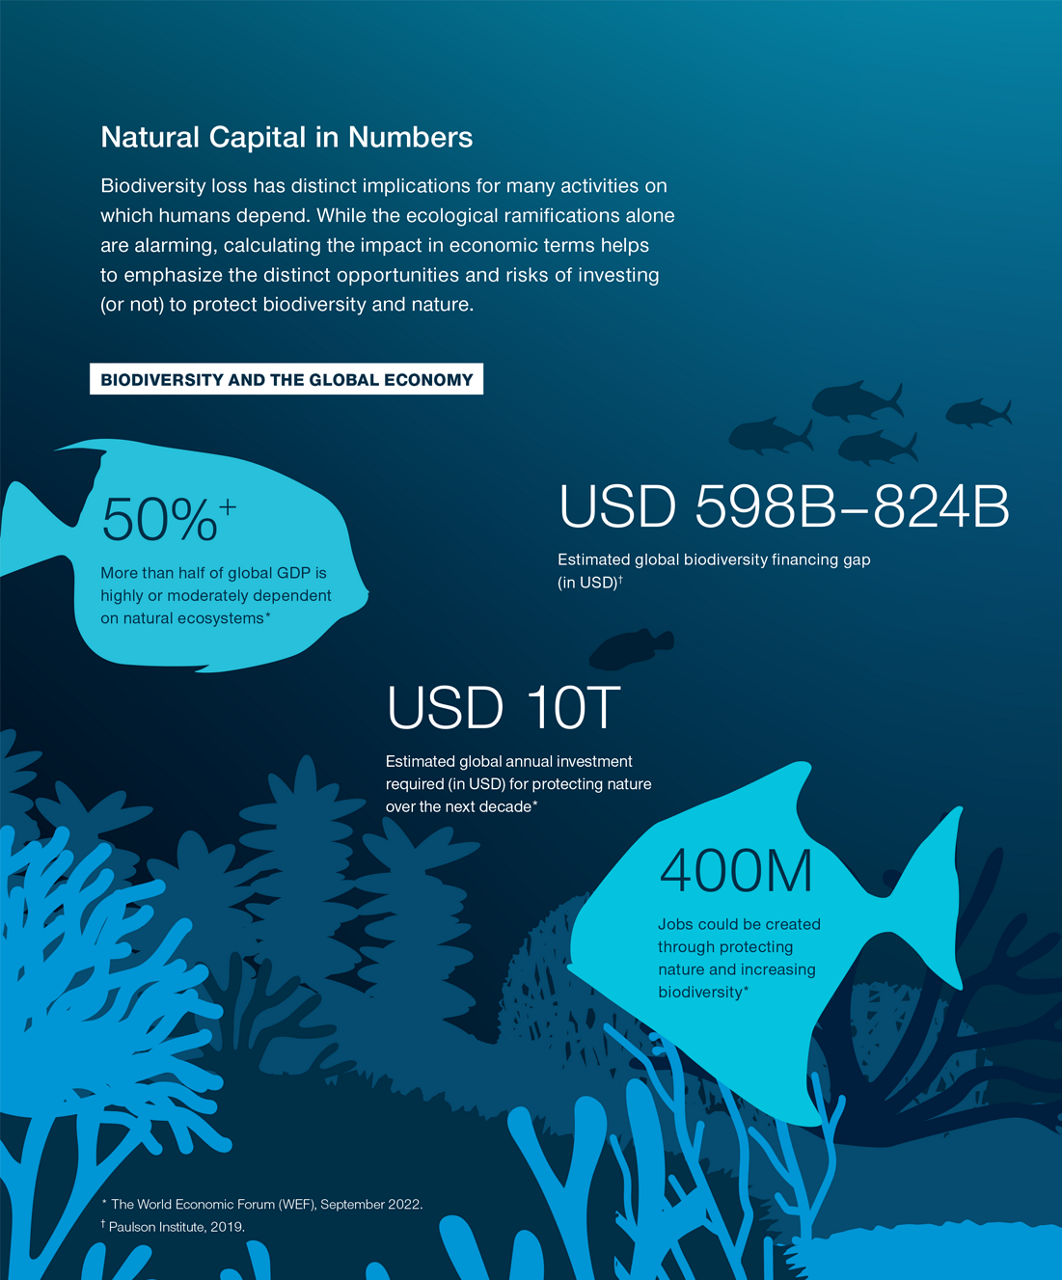 Illustration showing four data points that represent the impact in economic terms of biodiversity loss. These span the impact on global gross domestic product (50%+), the estimated global biodiversity financing gap (USD 598-824 billion), the estimated investment required annually to protect nature over the next decade (USD 10 trillion), and potential job creation (400 million).